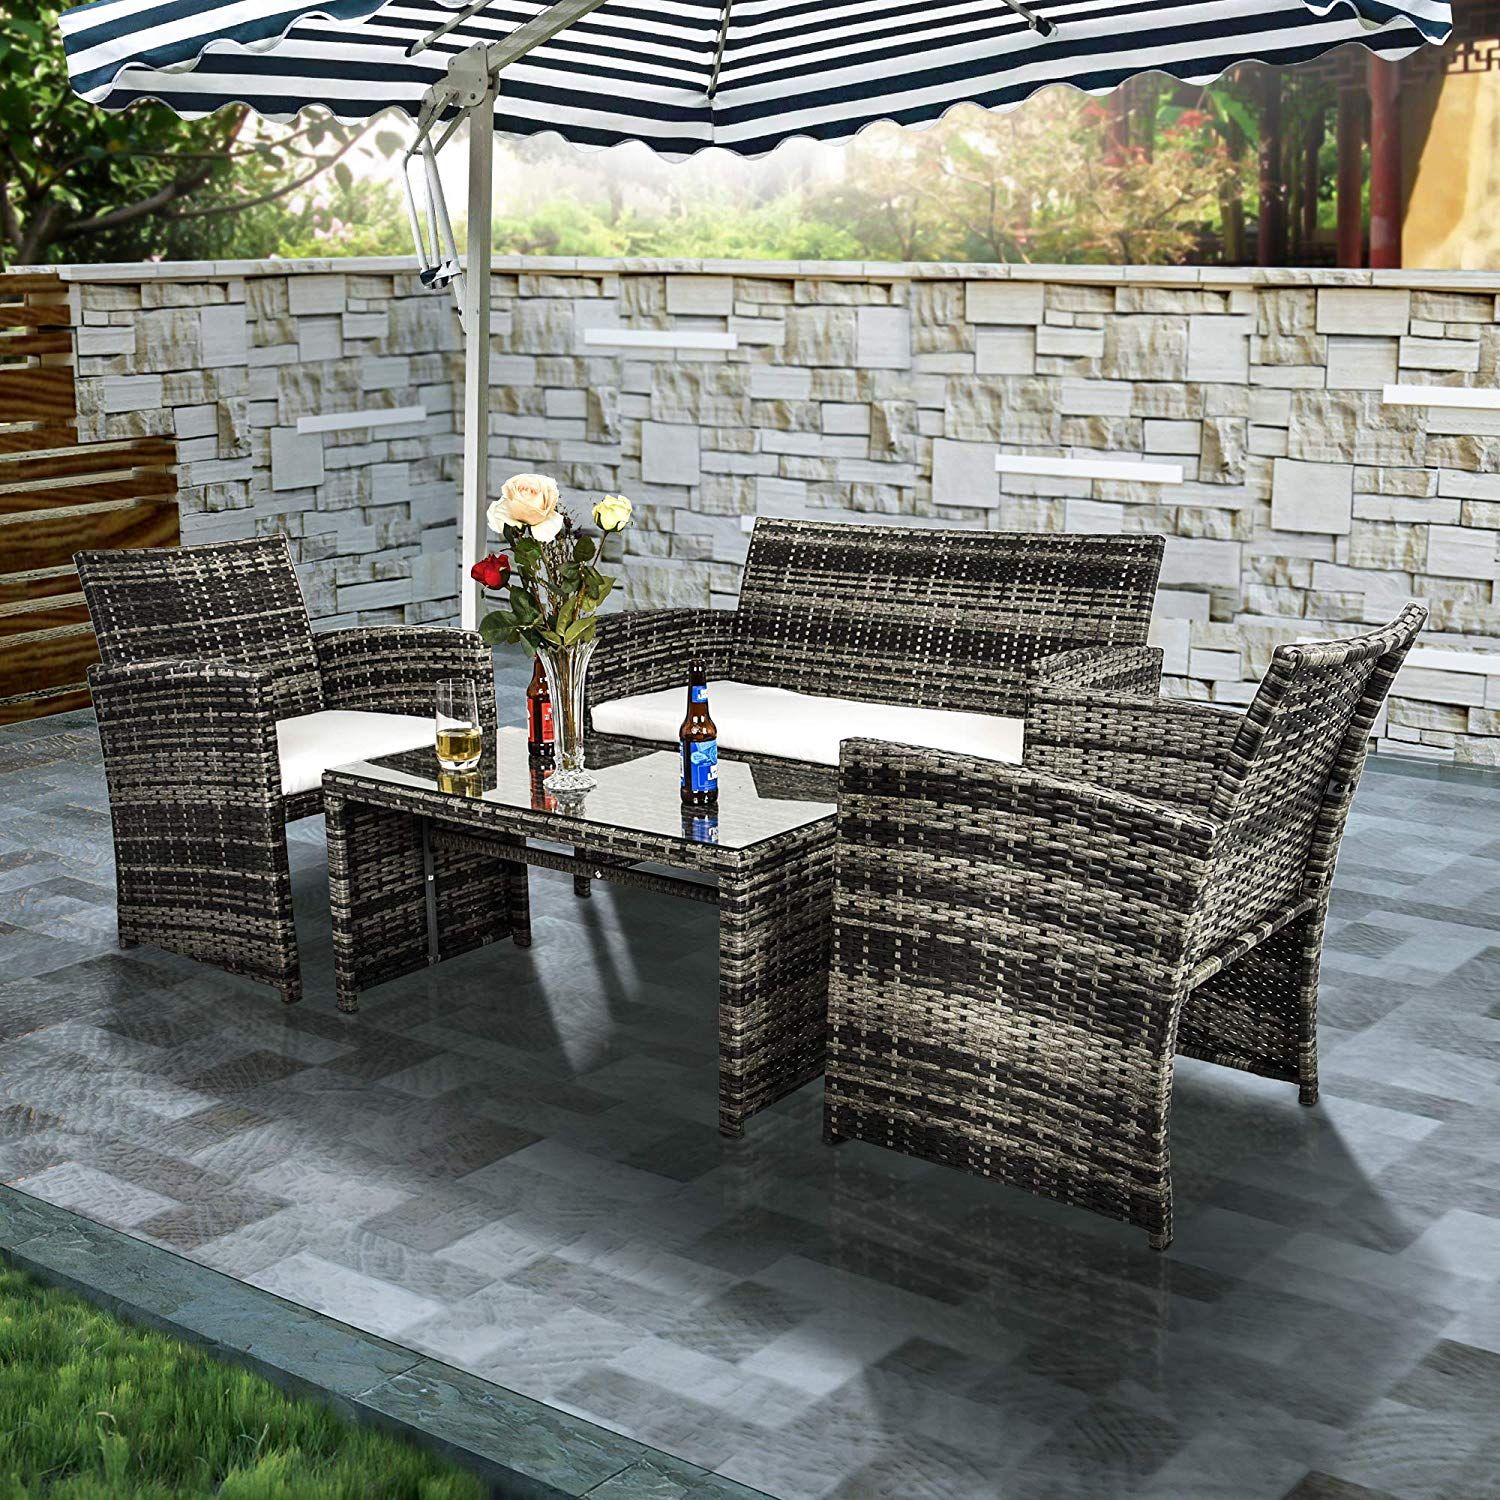 Outdoor lawn furniture sets